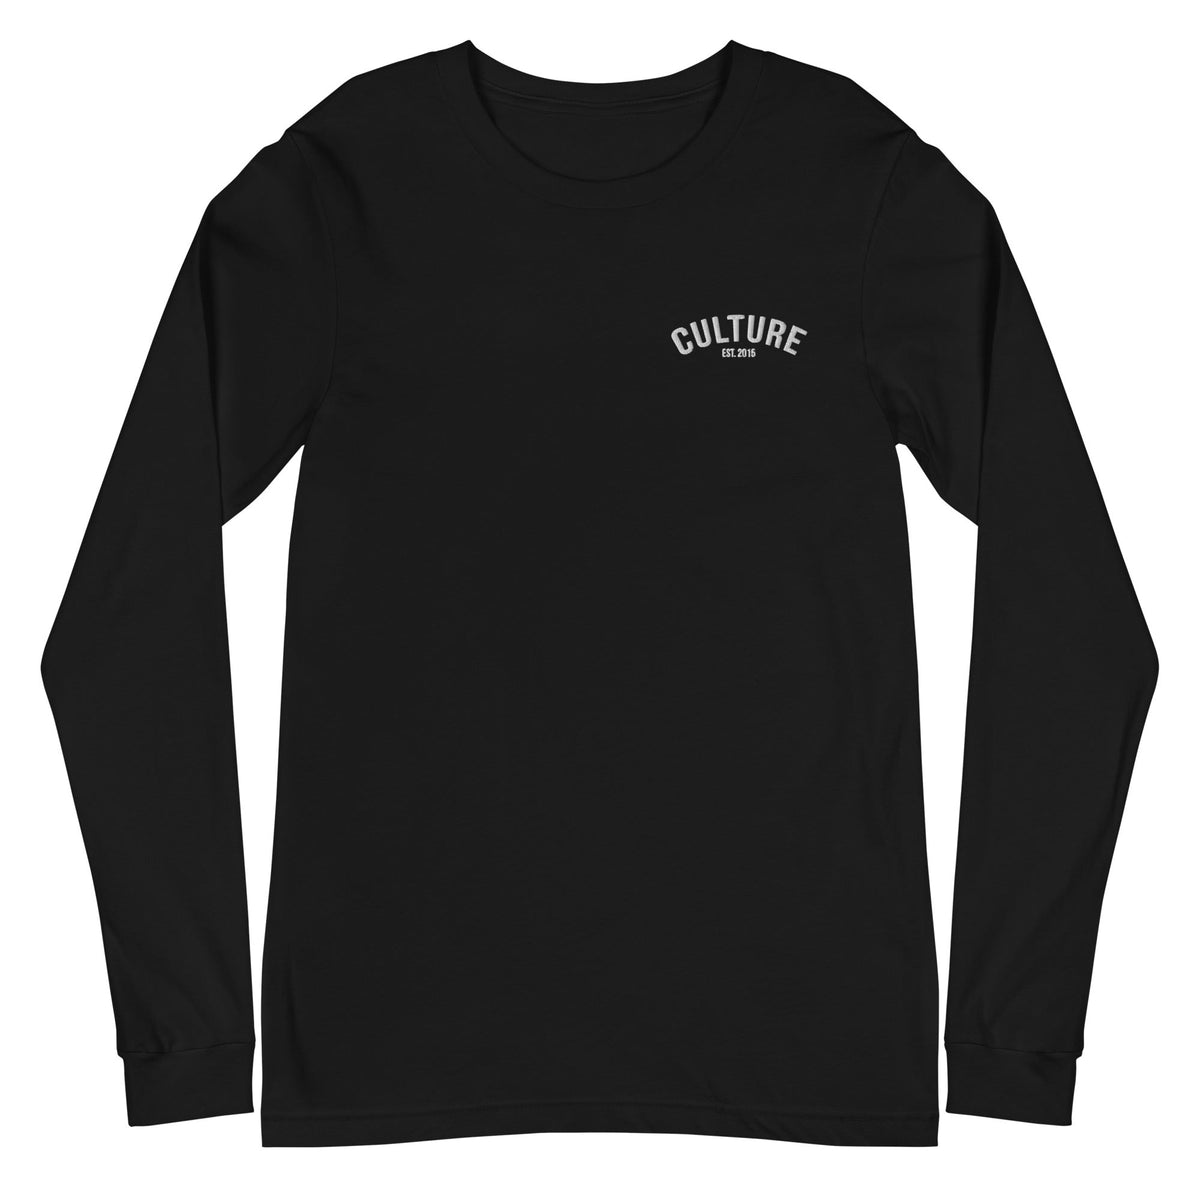 College Culture Long Sleeve T-Shirt - For The Culture Clothing Inc.